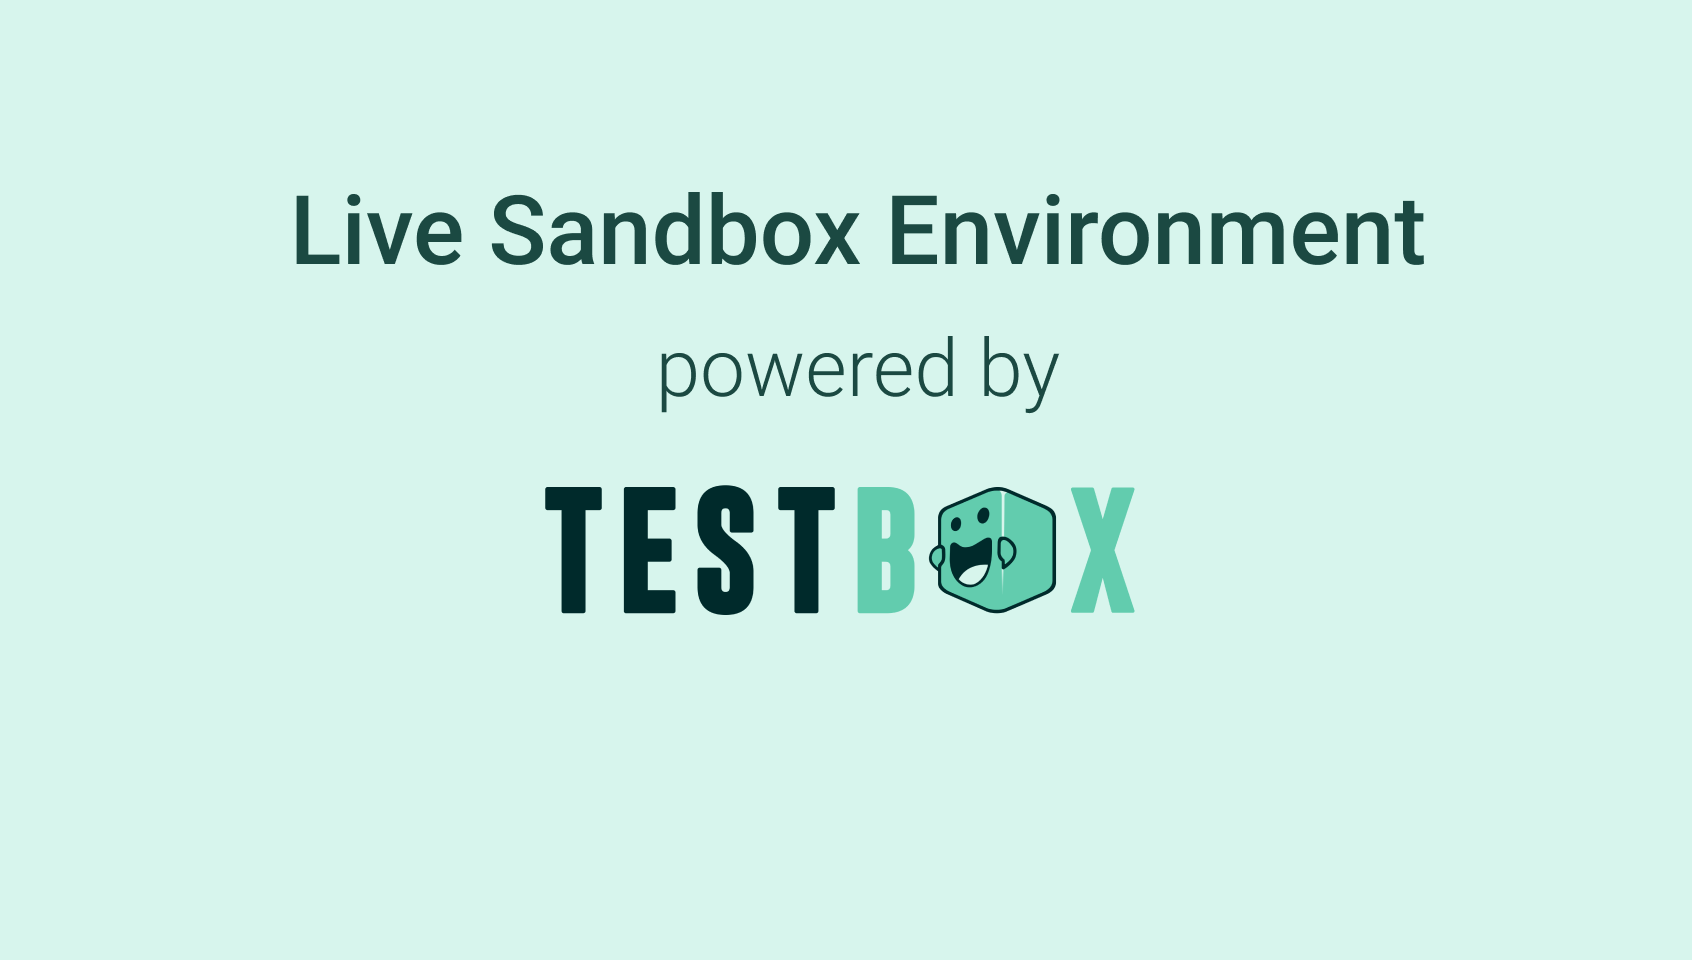 Test drive ActiveCampaign with sample data and real use cases